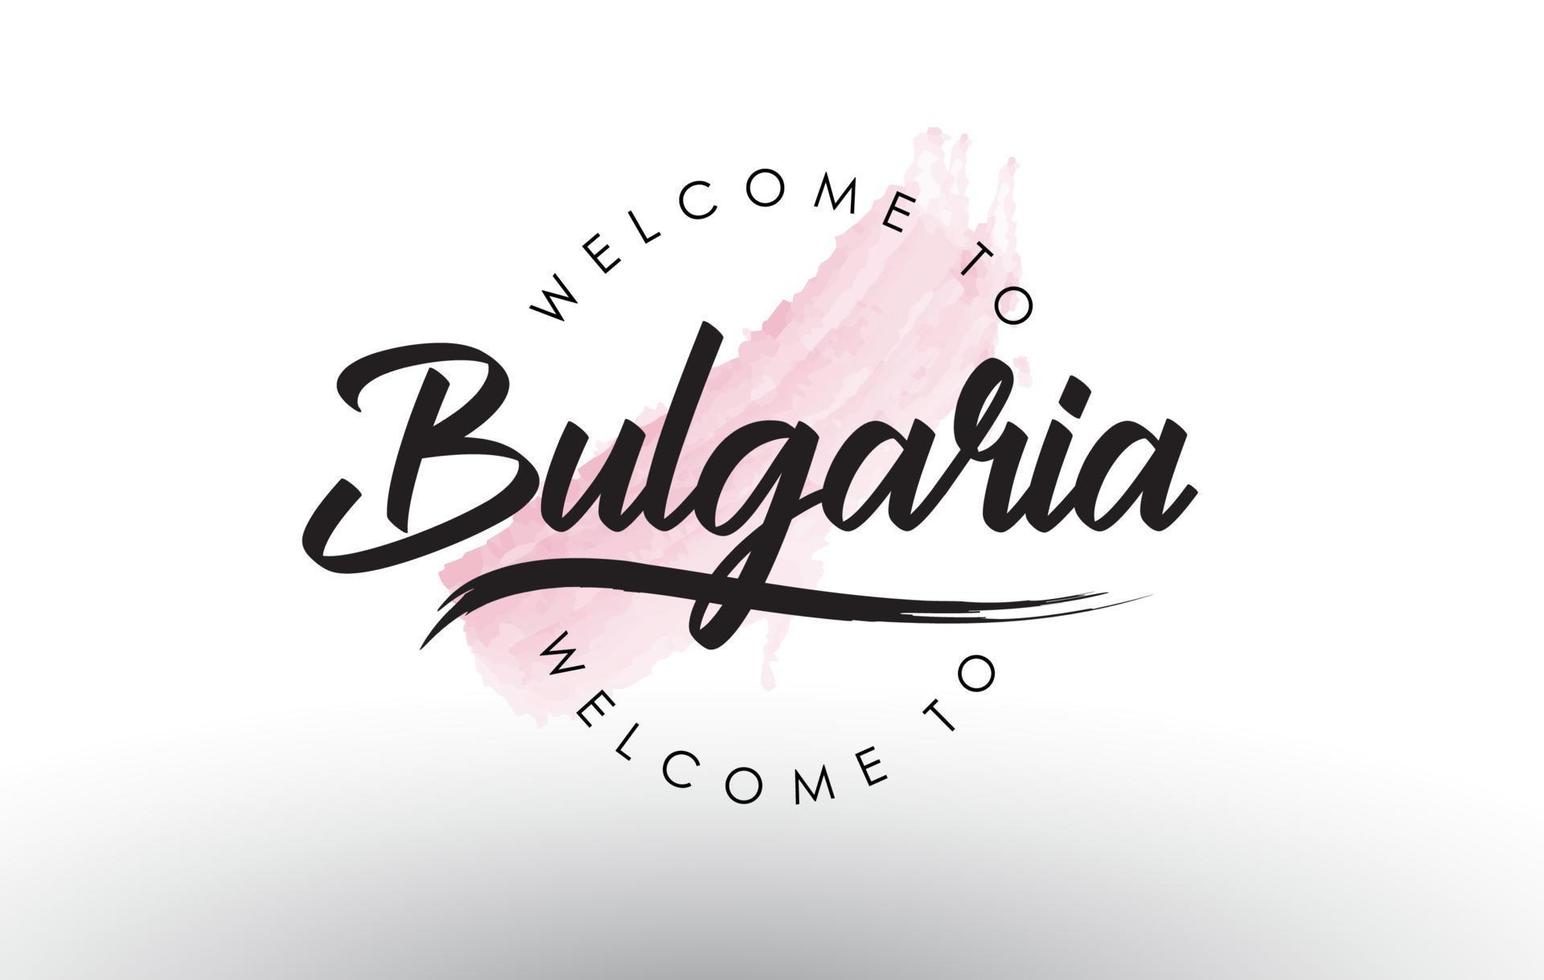 Bulgaria Welcome to Text with Watercolor Pink Brush Stroke vector